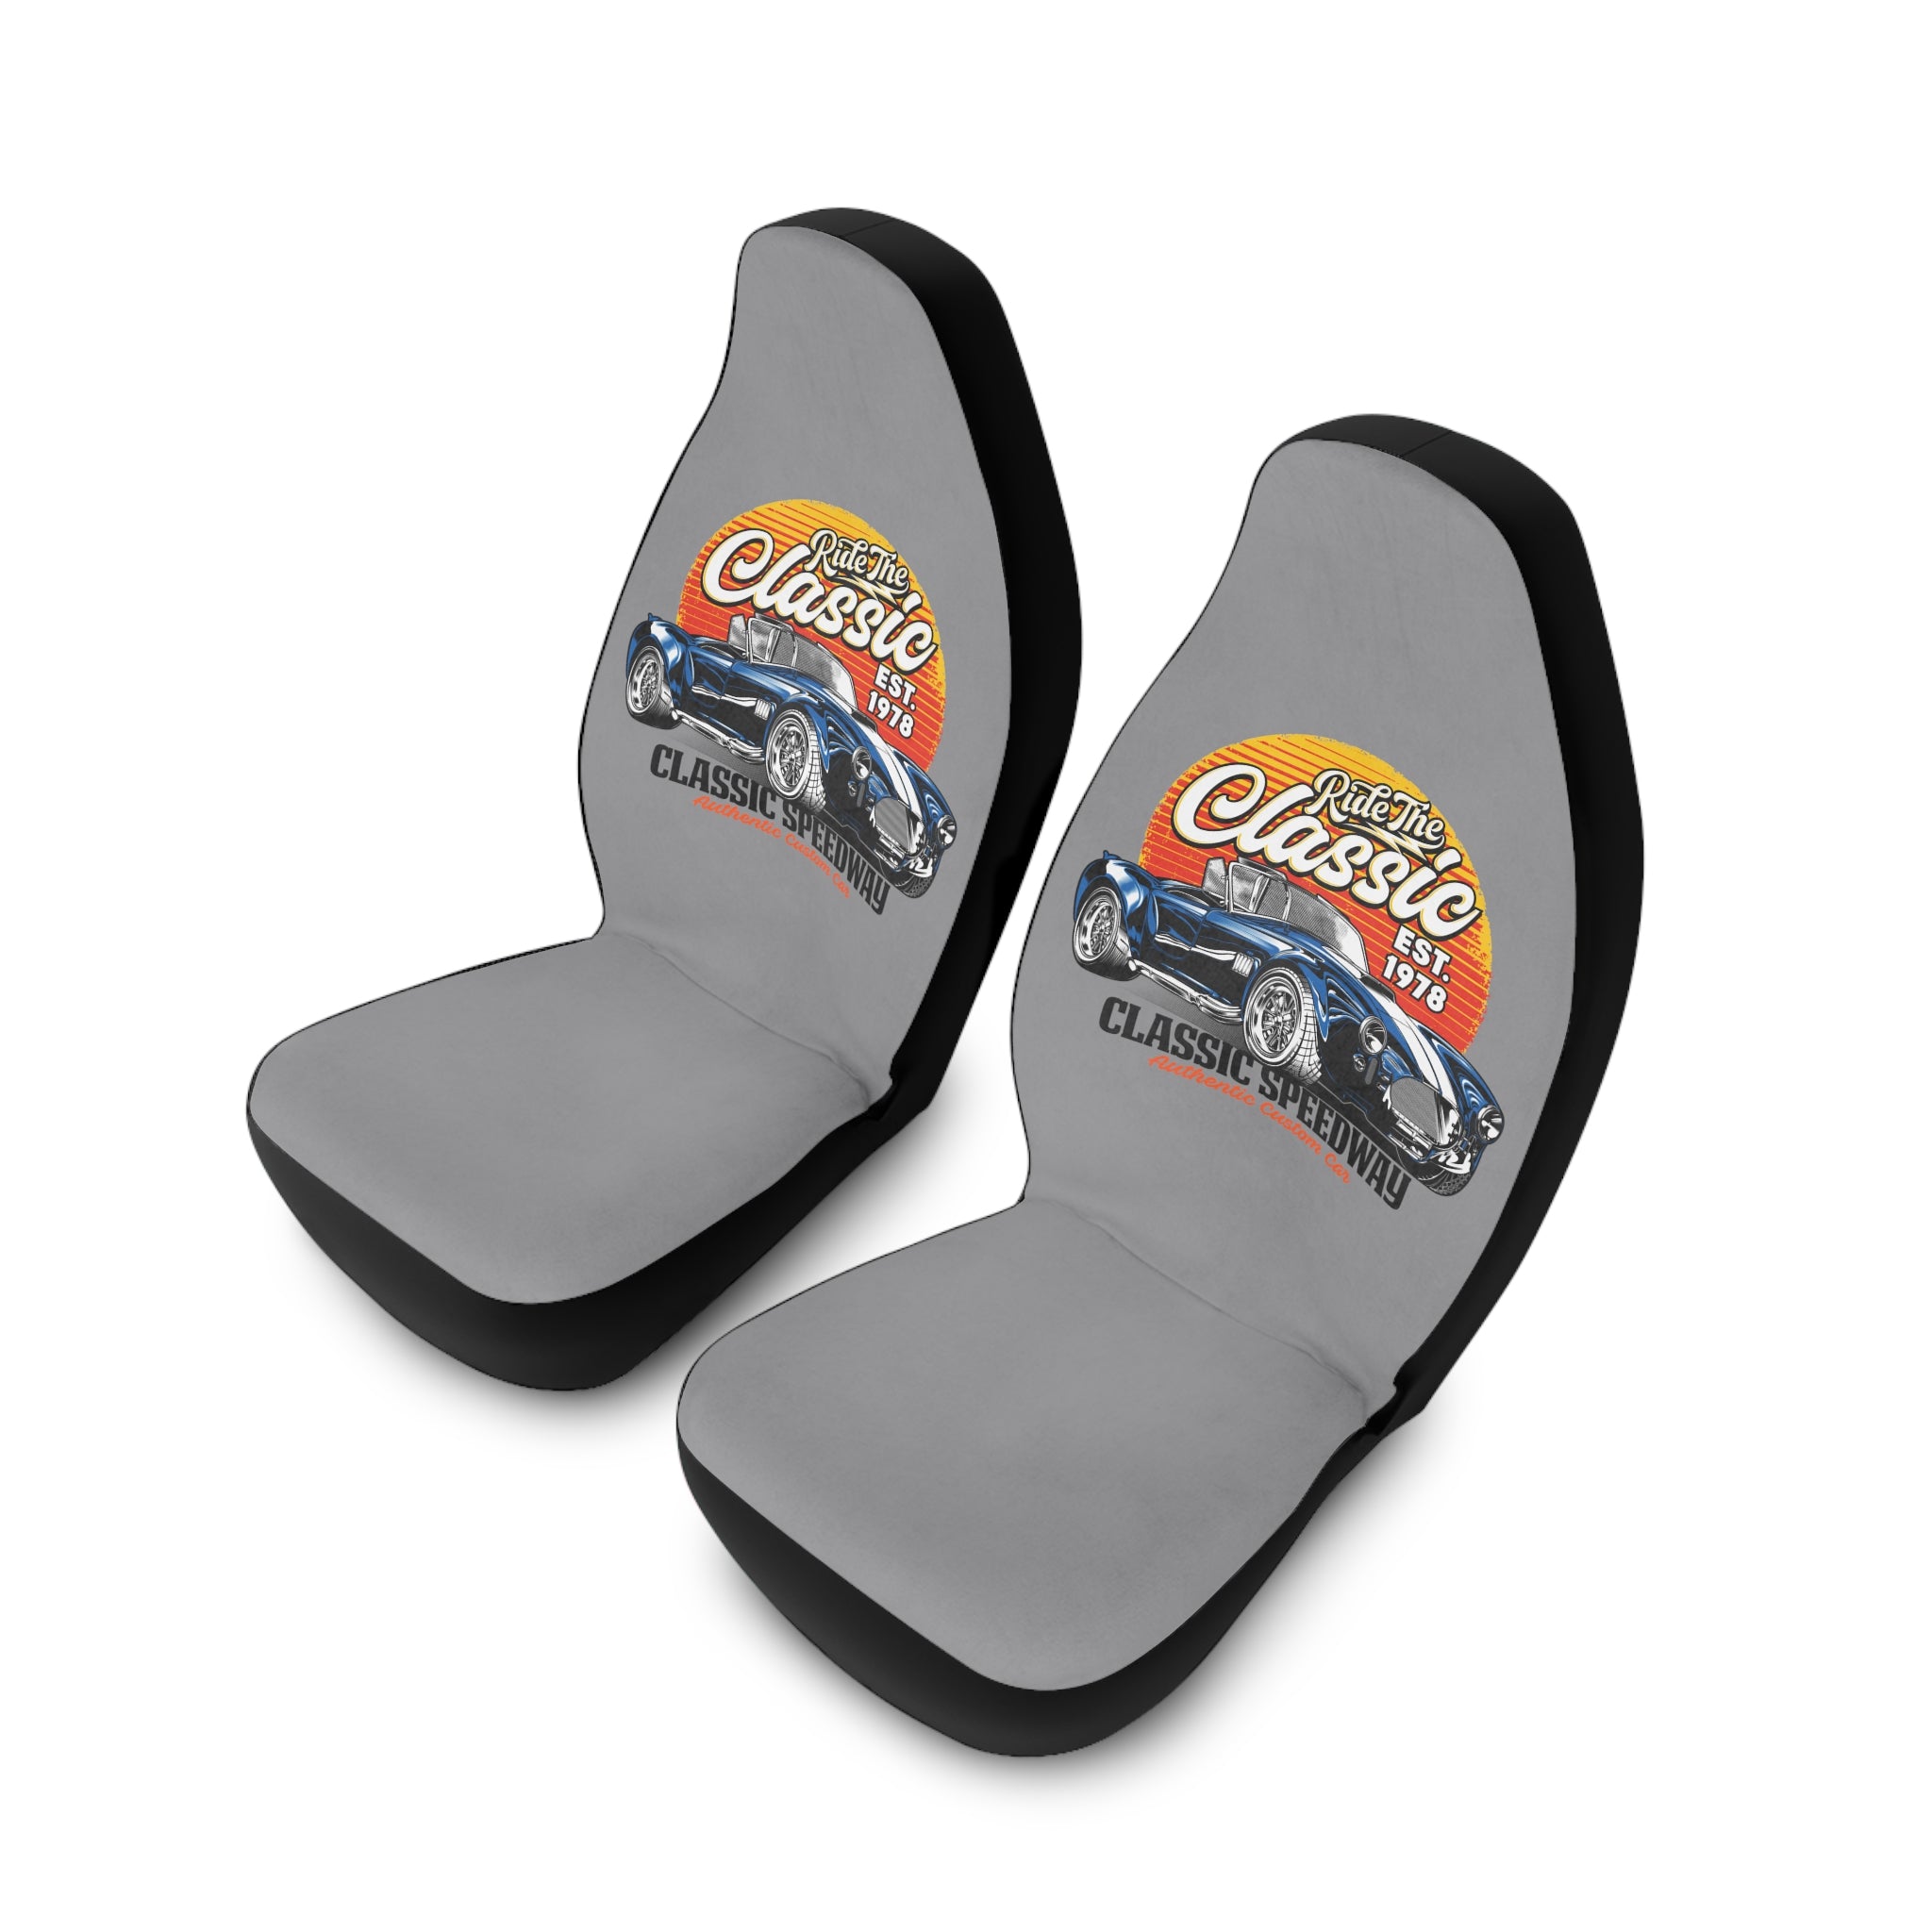 Vintage Classic Car Seat Covers